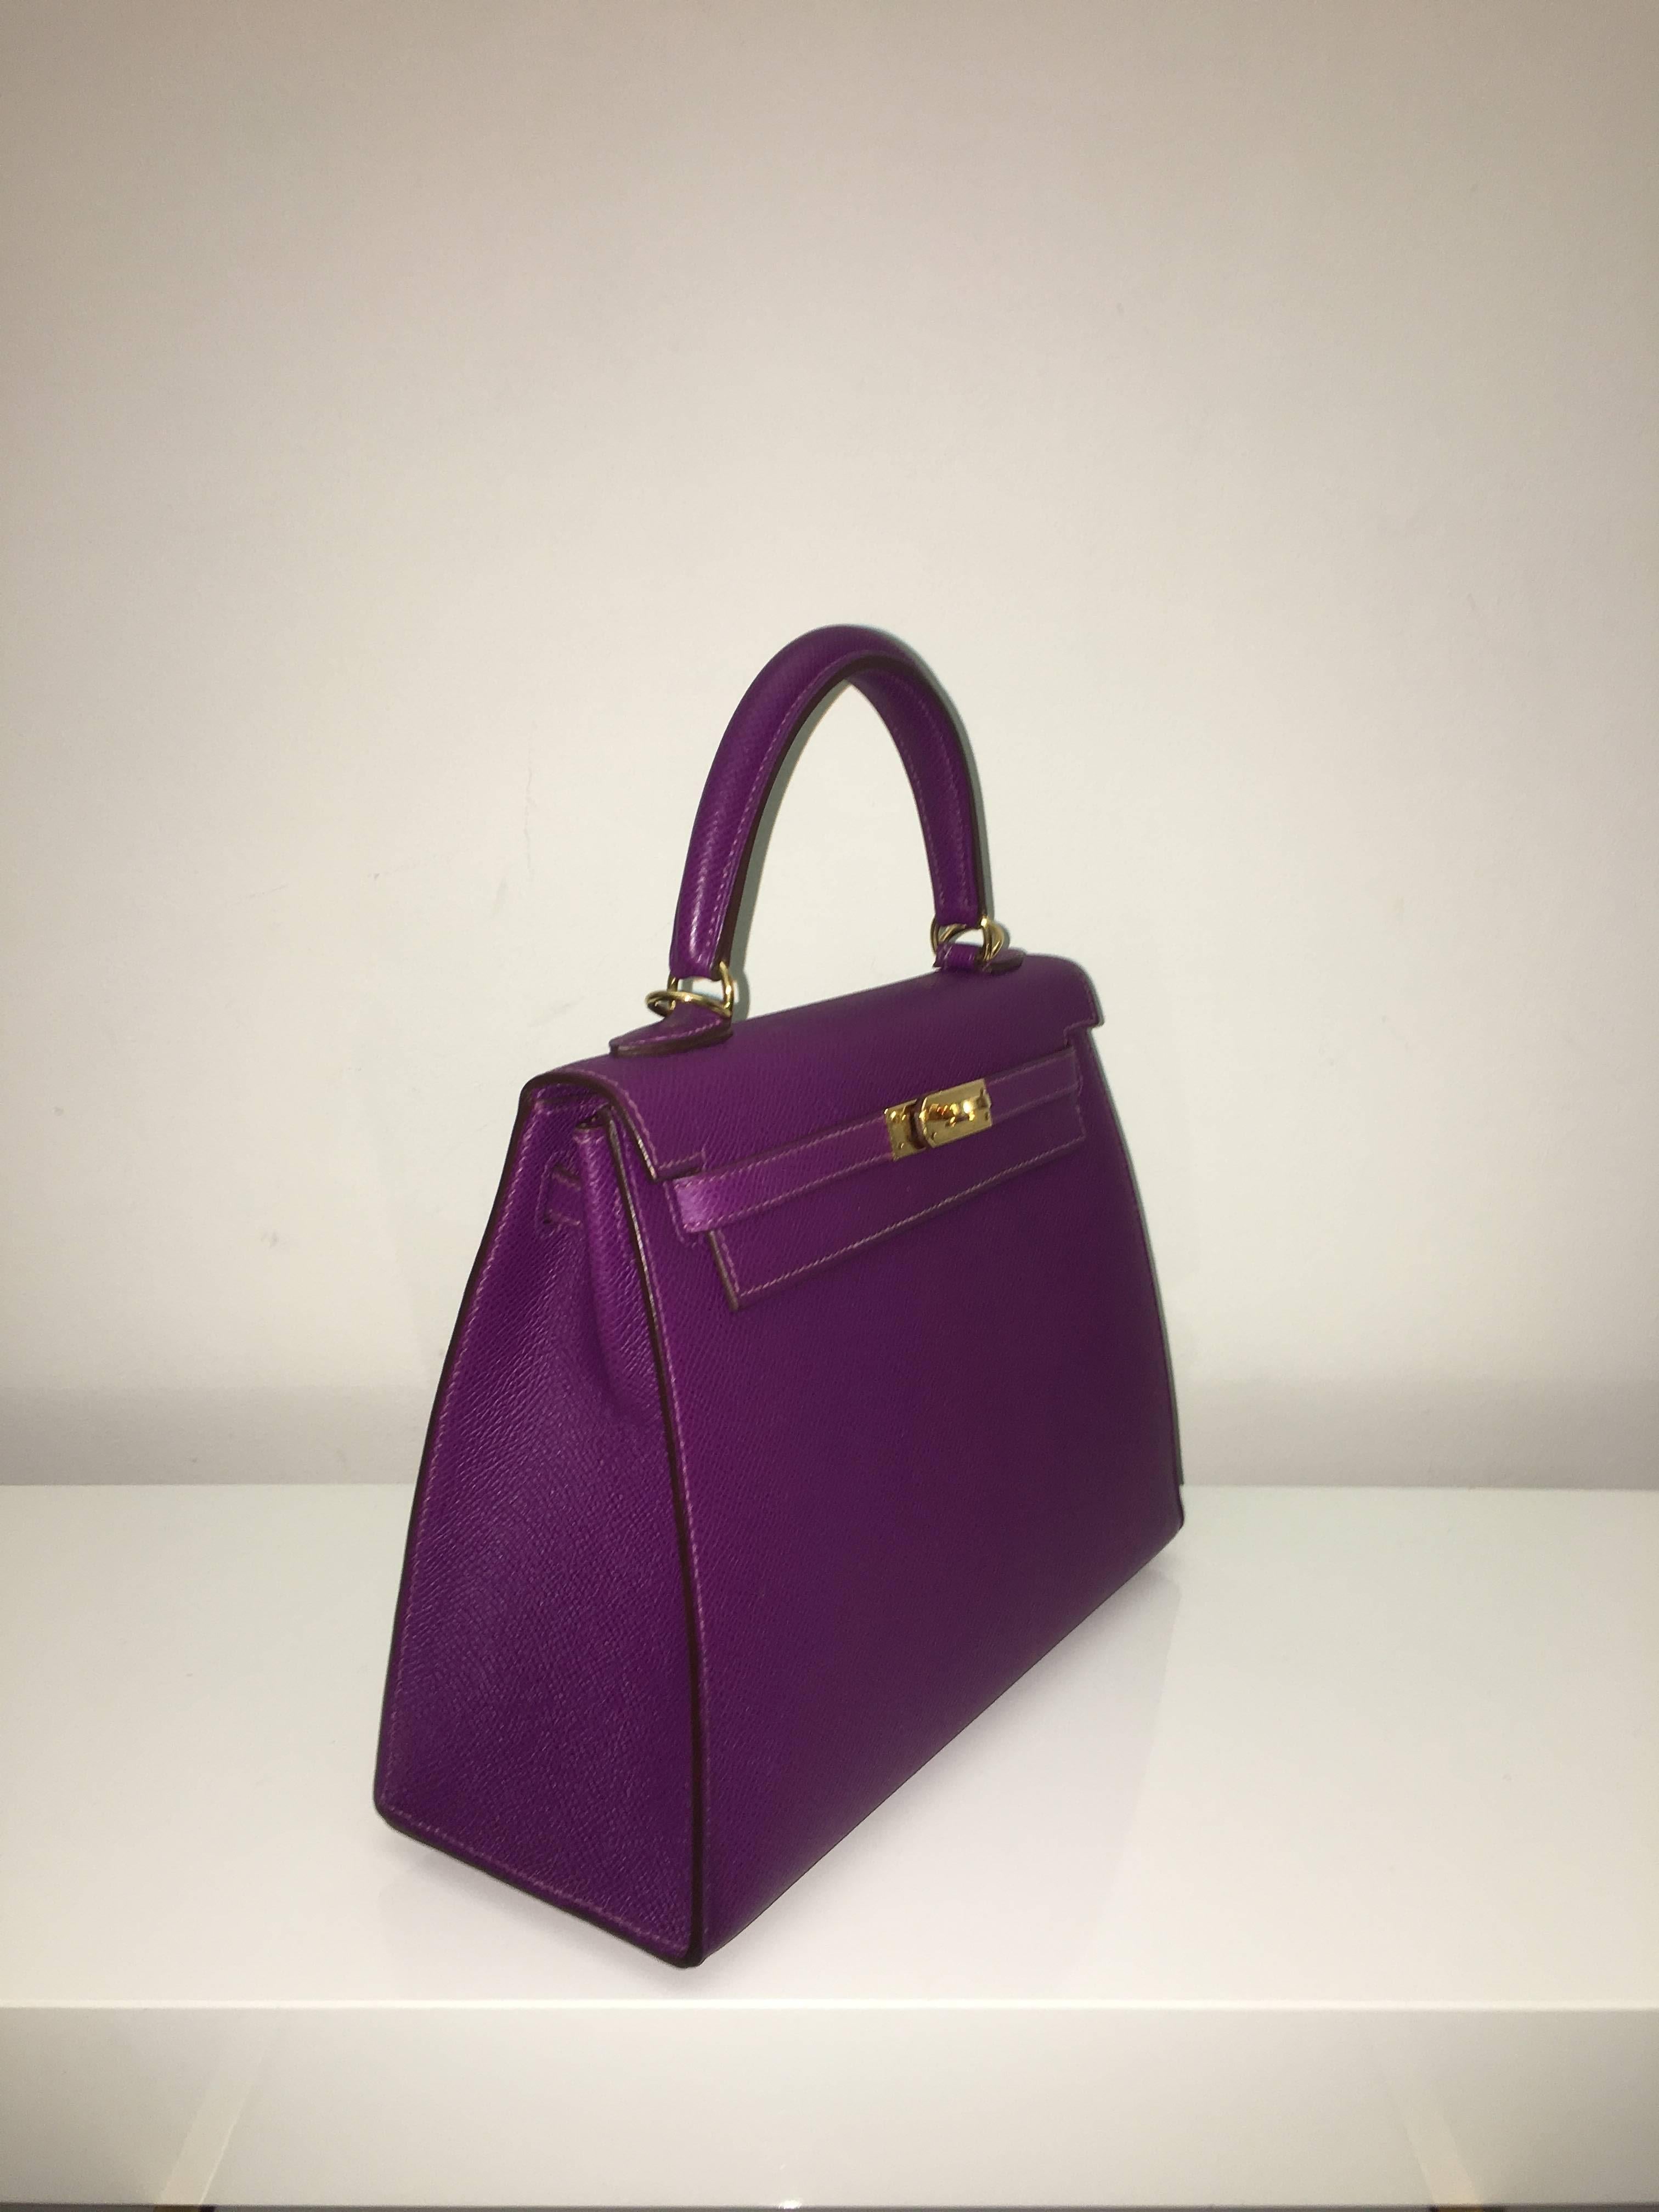 Hermes 
Kelly Size 25
Epsom Leather 
Colour Anemone
Gold Hardware
store fresh, comes with receipt and full set (dust bag, box...) 
Hydeparkfashion specializes in sourcing and delivering authentic luxury handbags, mainly Hermes, to client around the